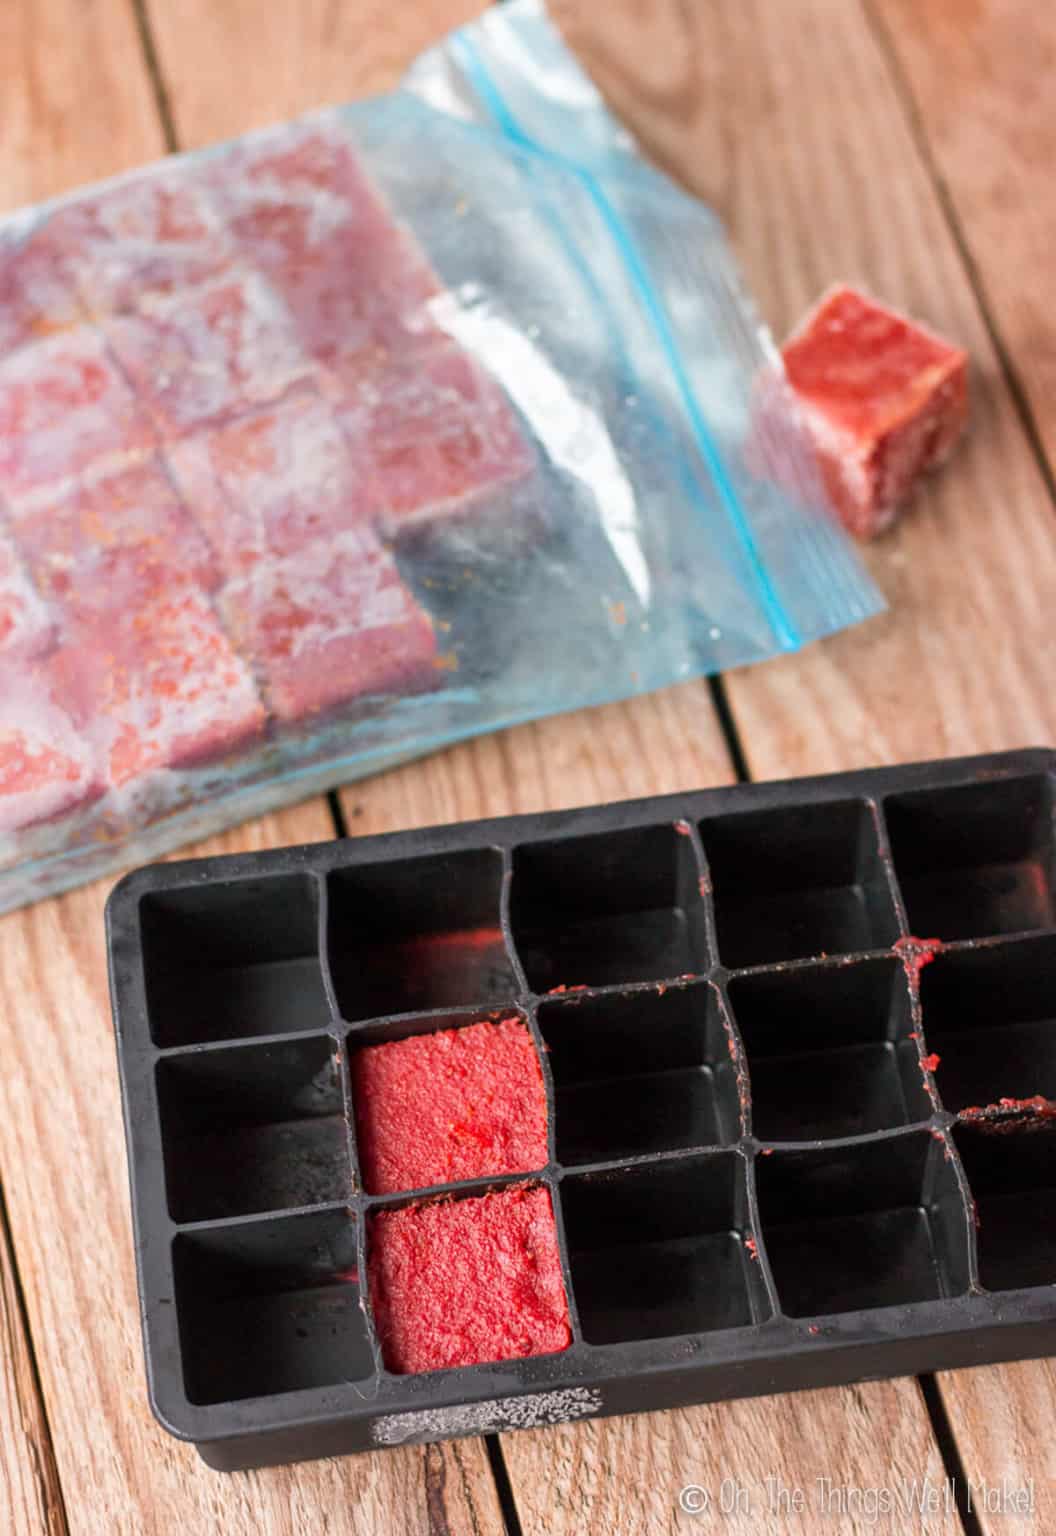 Overhead view of homemade tomato paste in ice cube trays for freezing and storing.